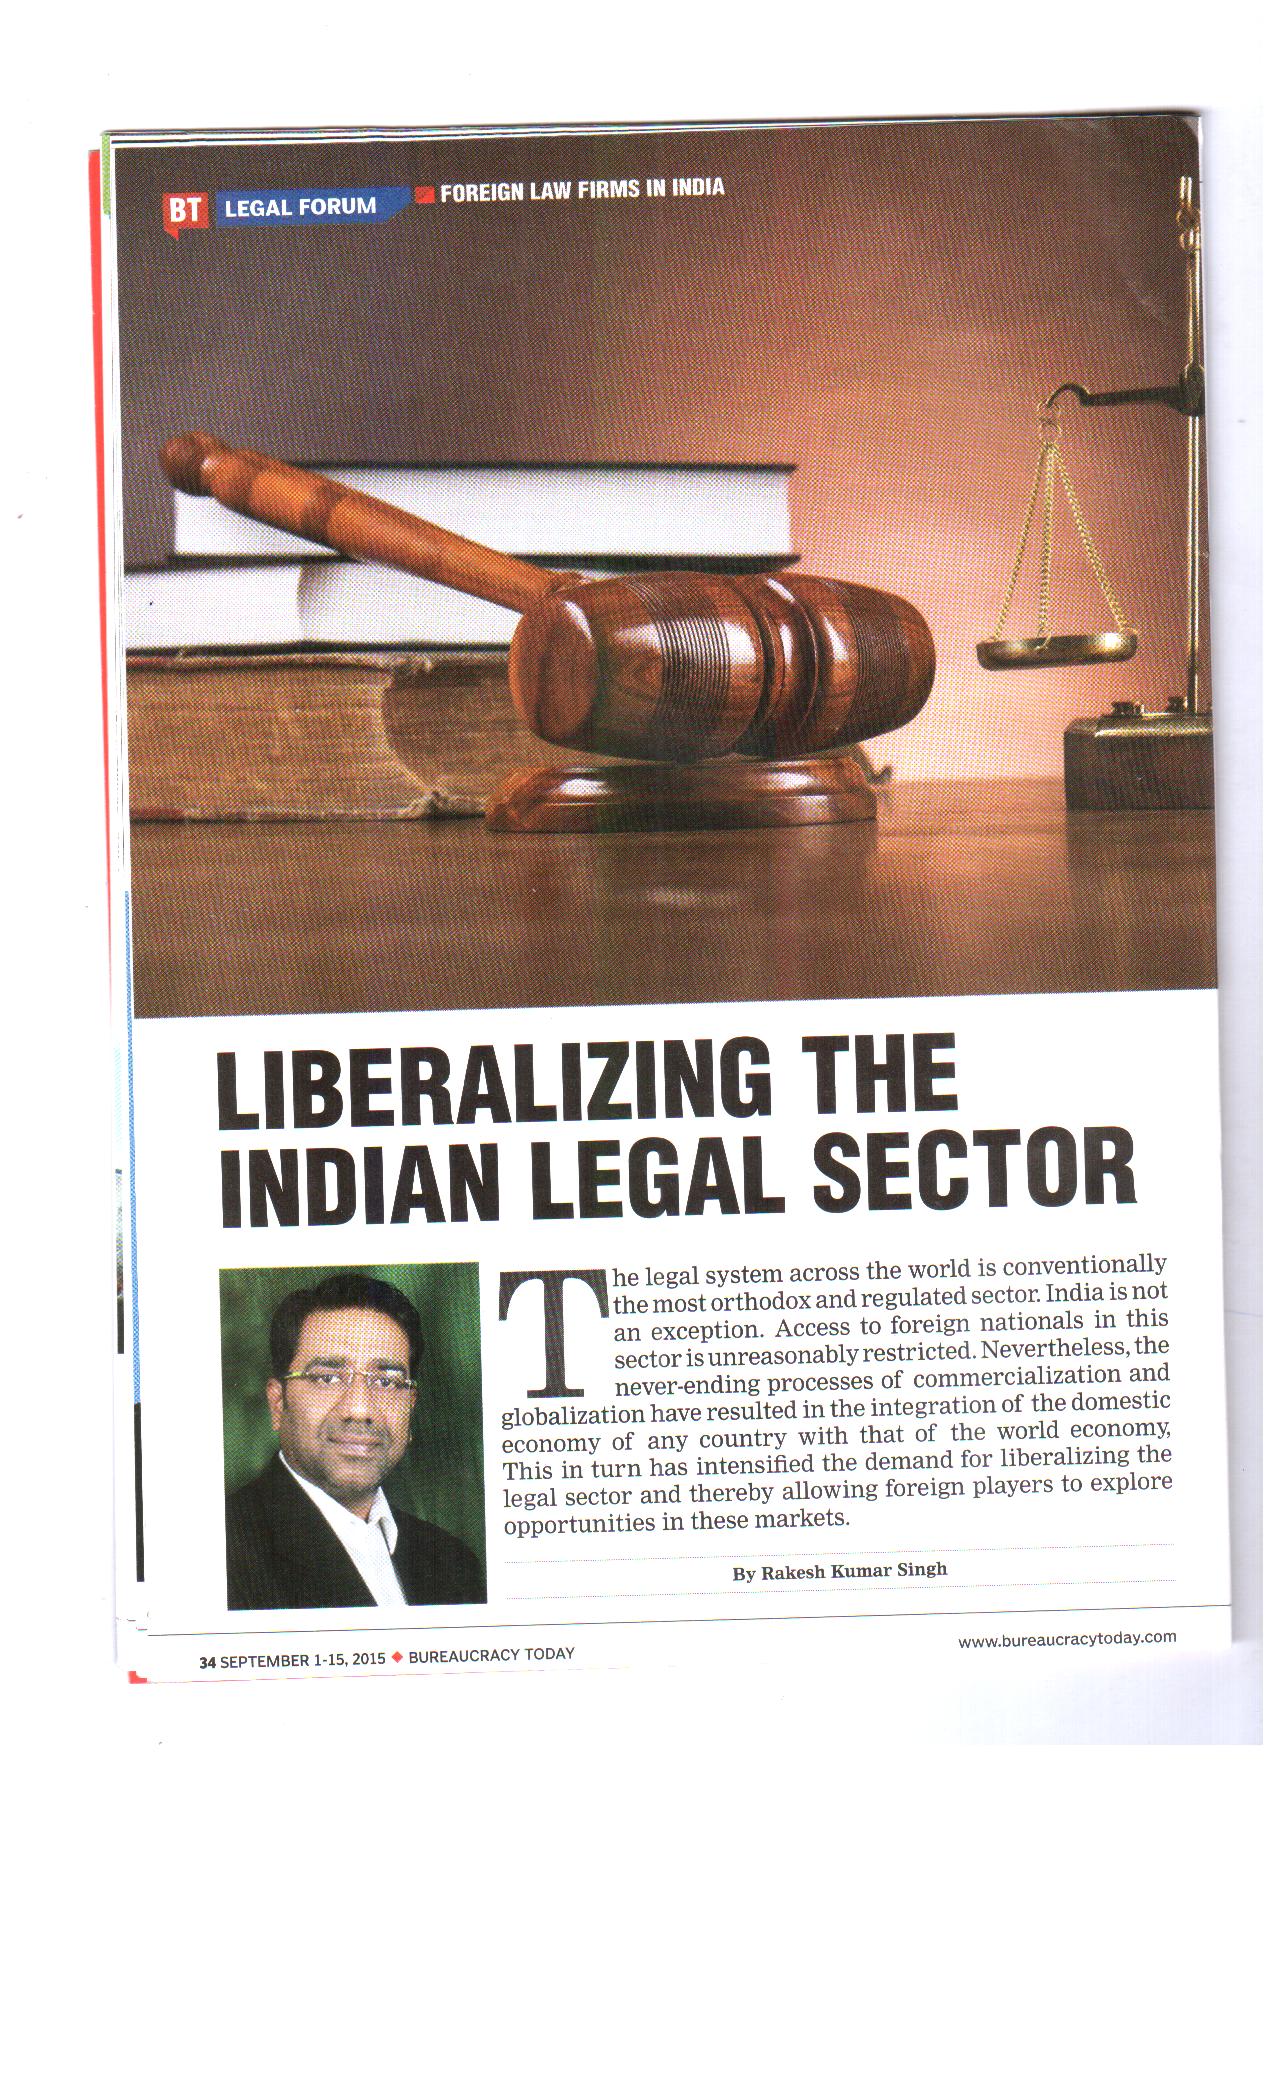 Liberalizing Indian Legal sector